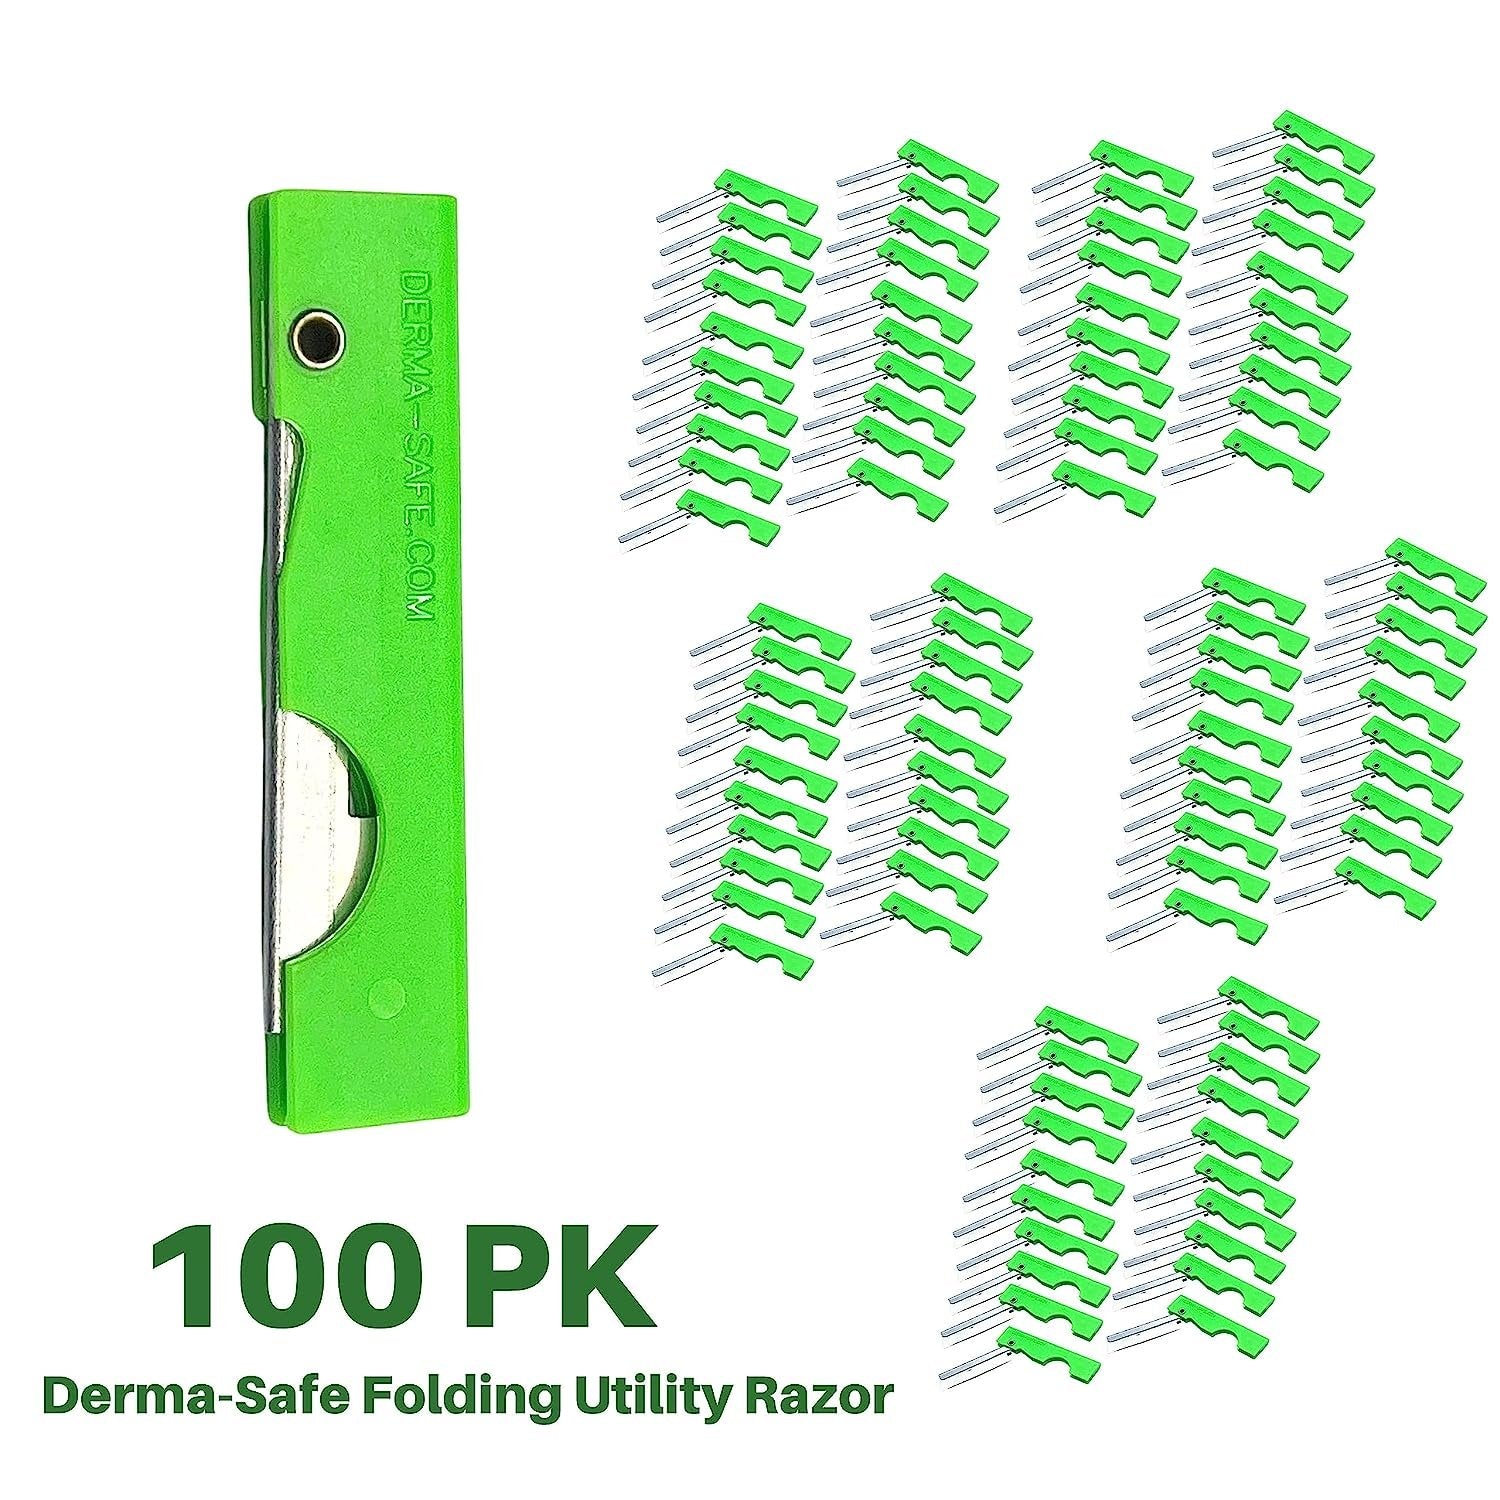 Derma-Safe Folding Utility Razor for Survival Utility and First Aid Kits - Mini Pocket Foldable Razor Blade, Folding Scalpel, (Red) 100-Pack